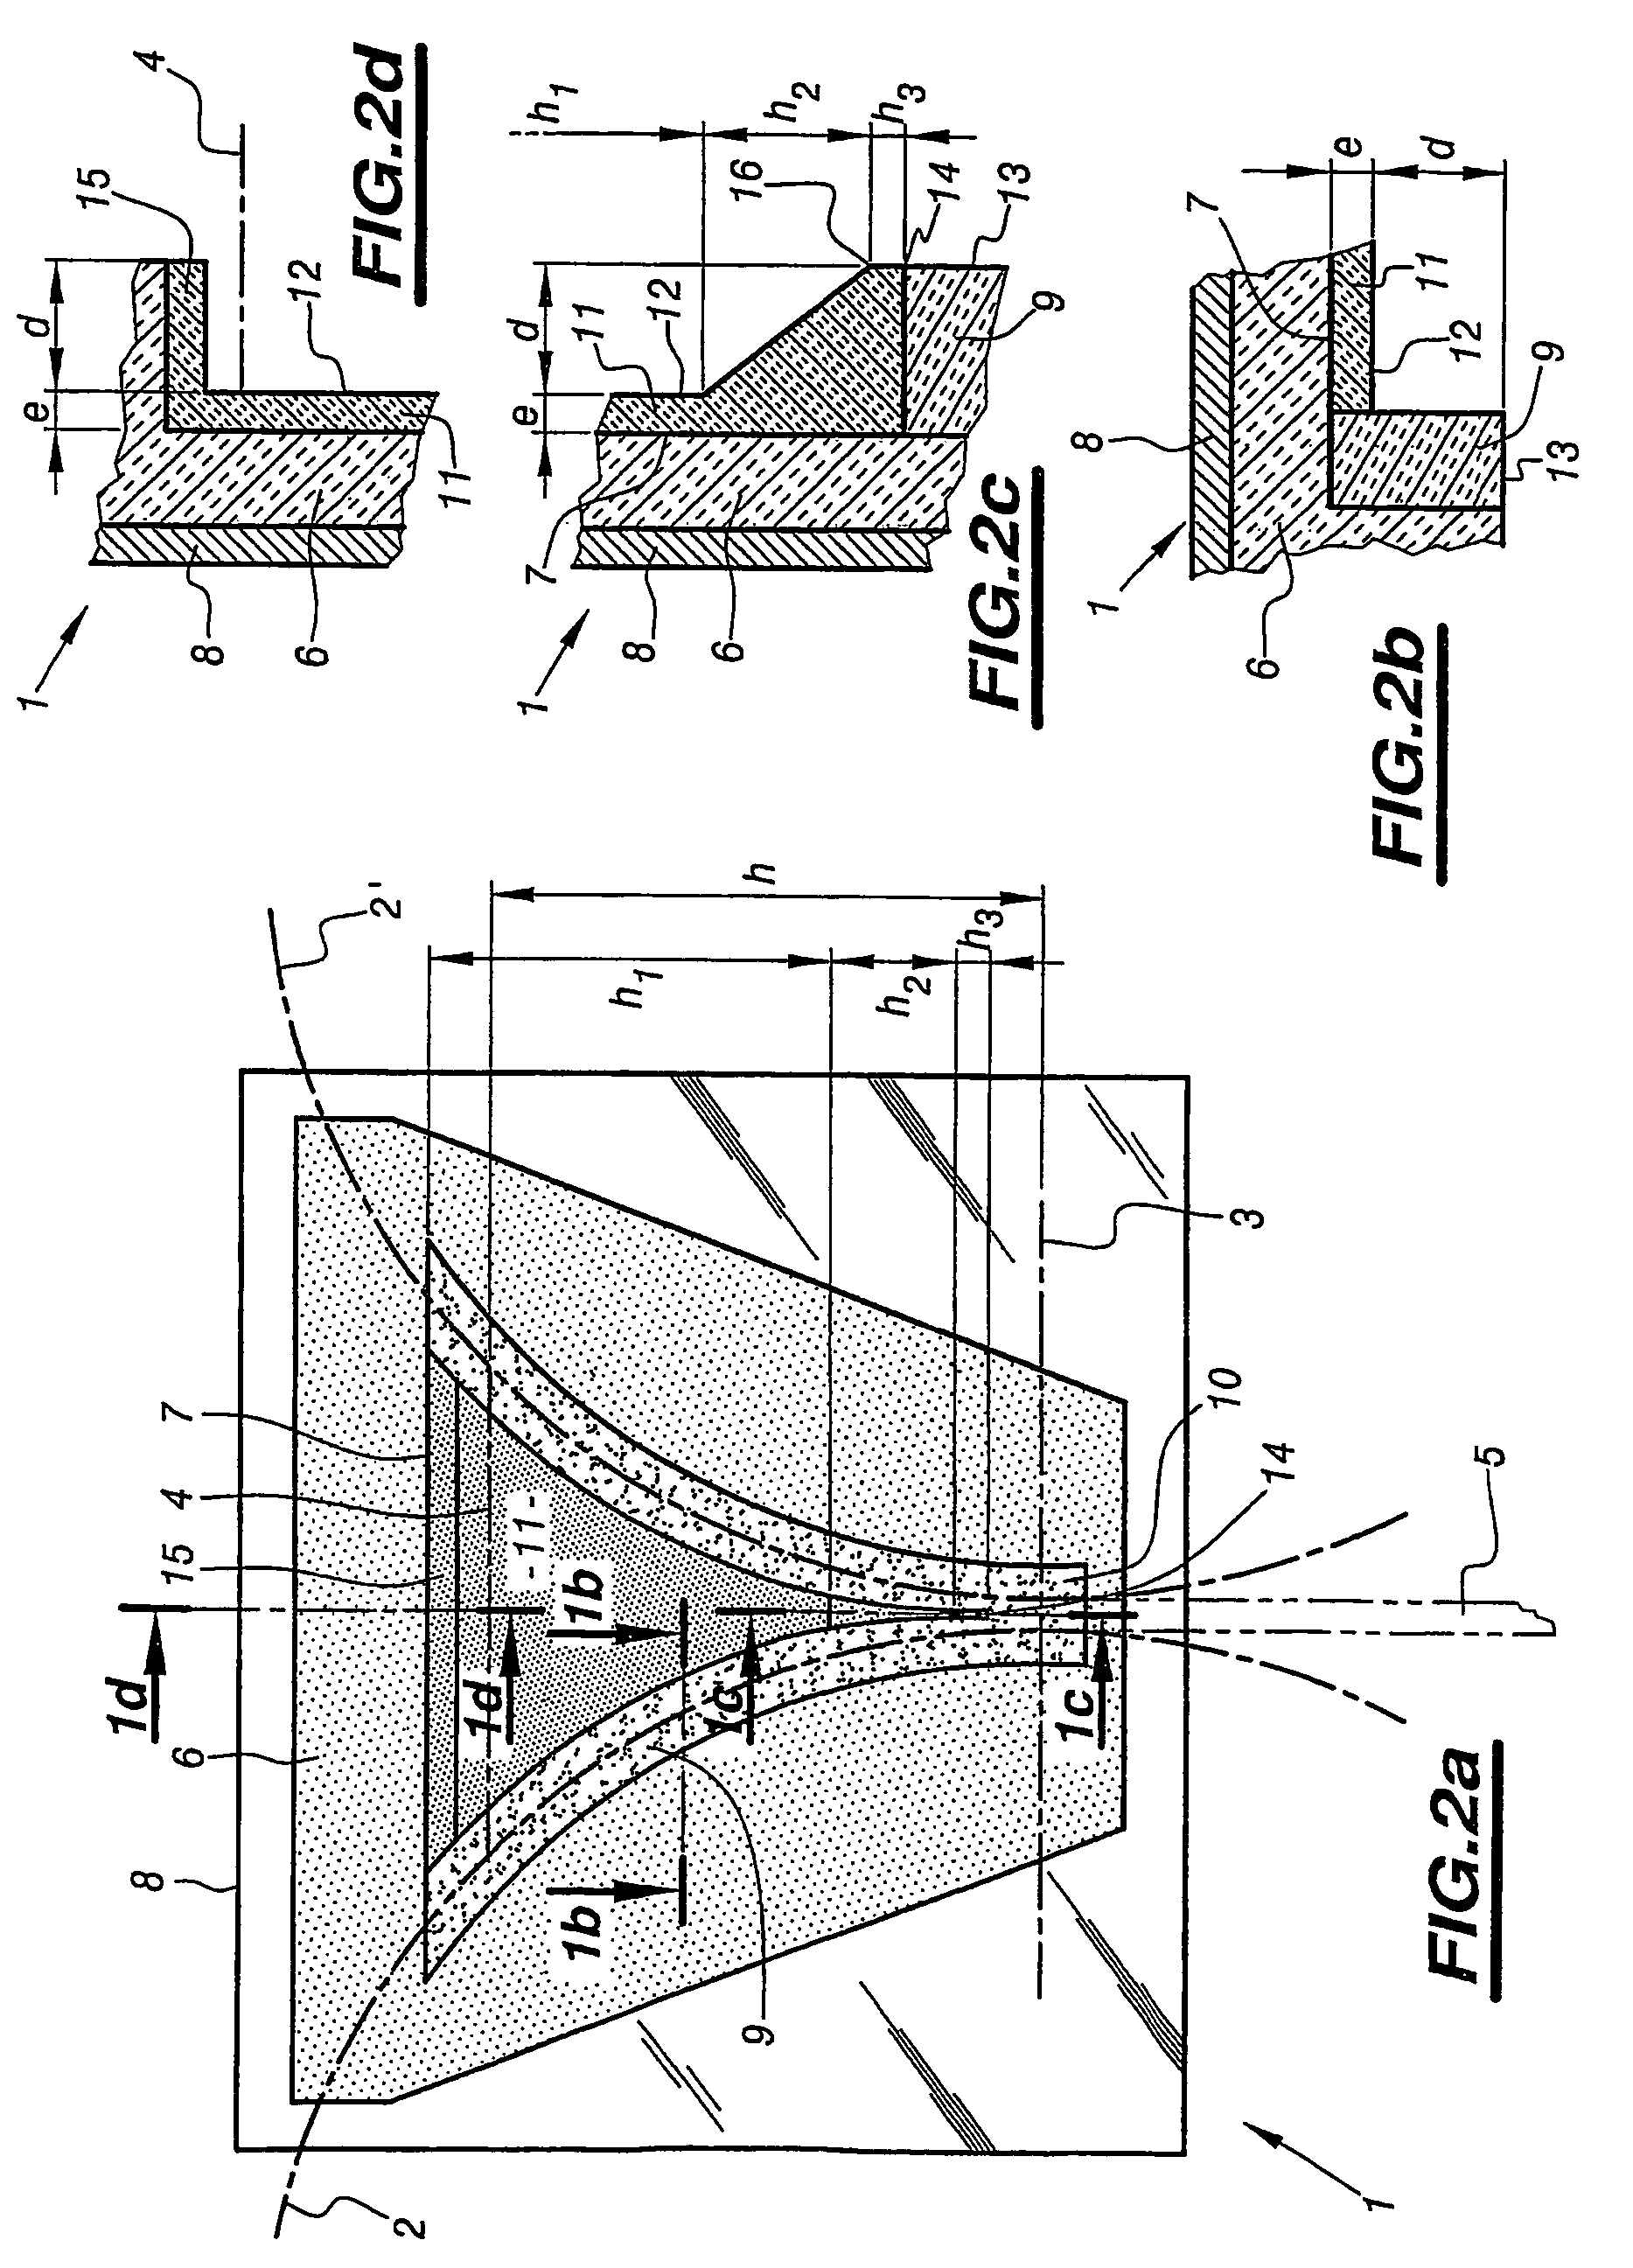 Lateral face of an installation used for the twin-roll continuous casting of metal bands